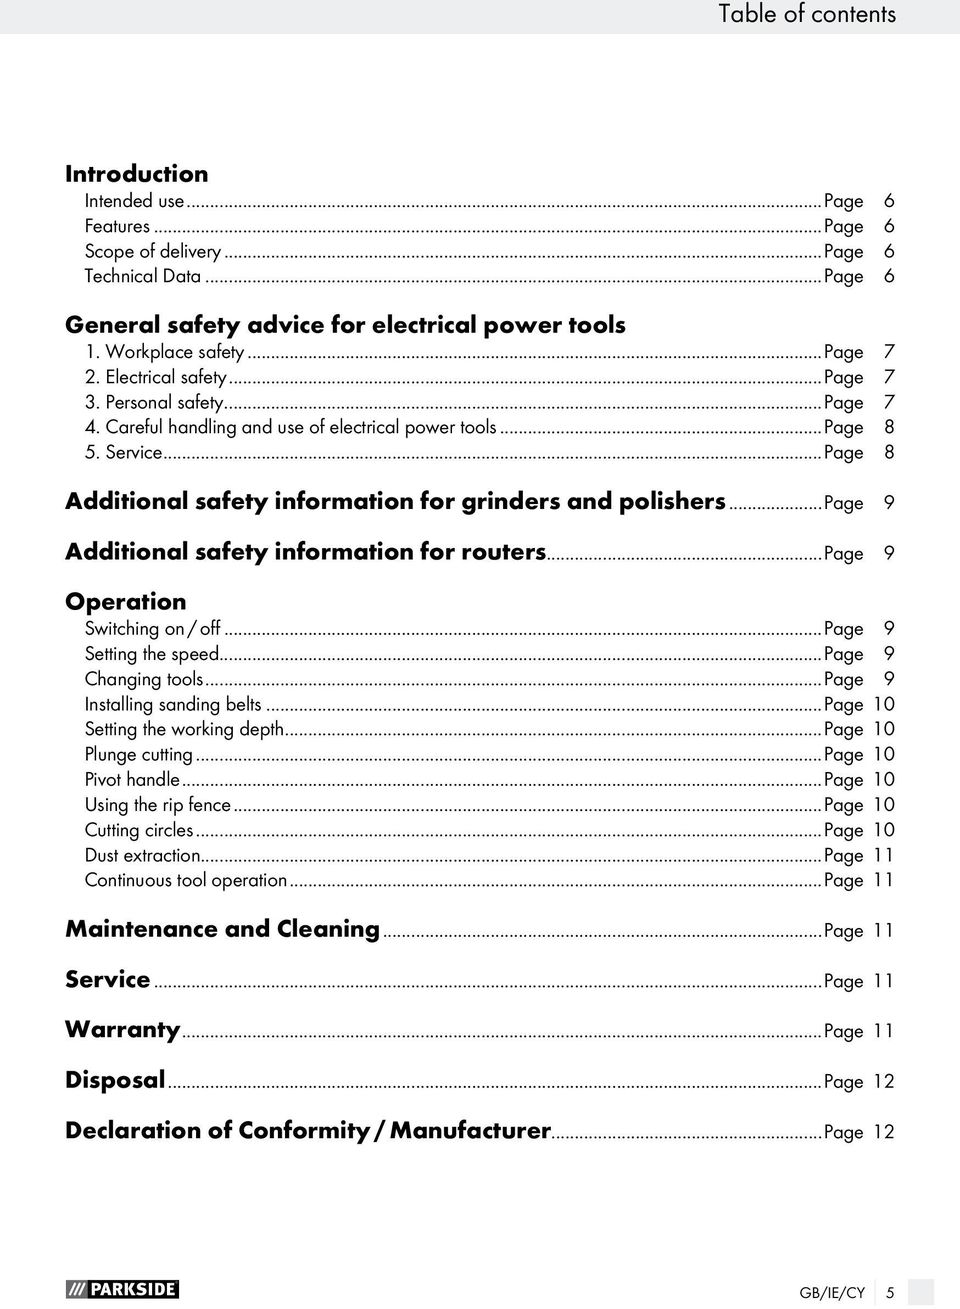 ..page 9 Additional safety information for routers...page 9 Operation Switching on / off...page 9 Setting the speed...page 9 Changing tools...page 9 Installing sanding belts.